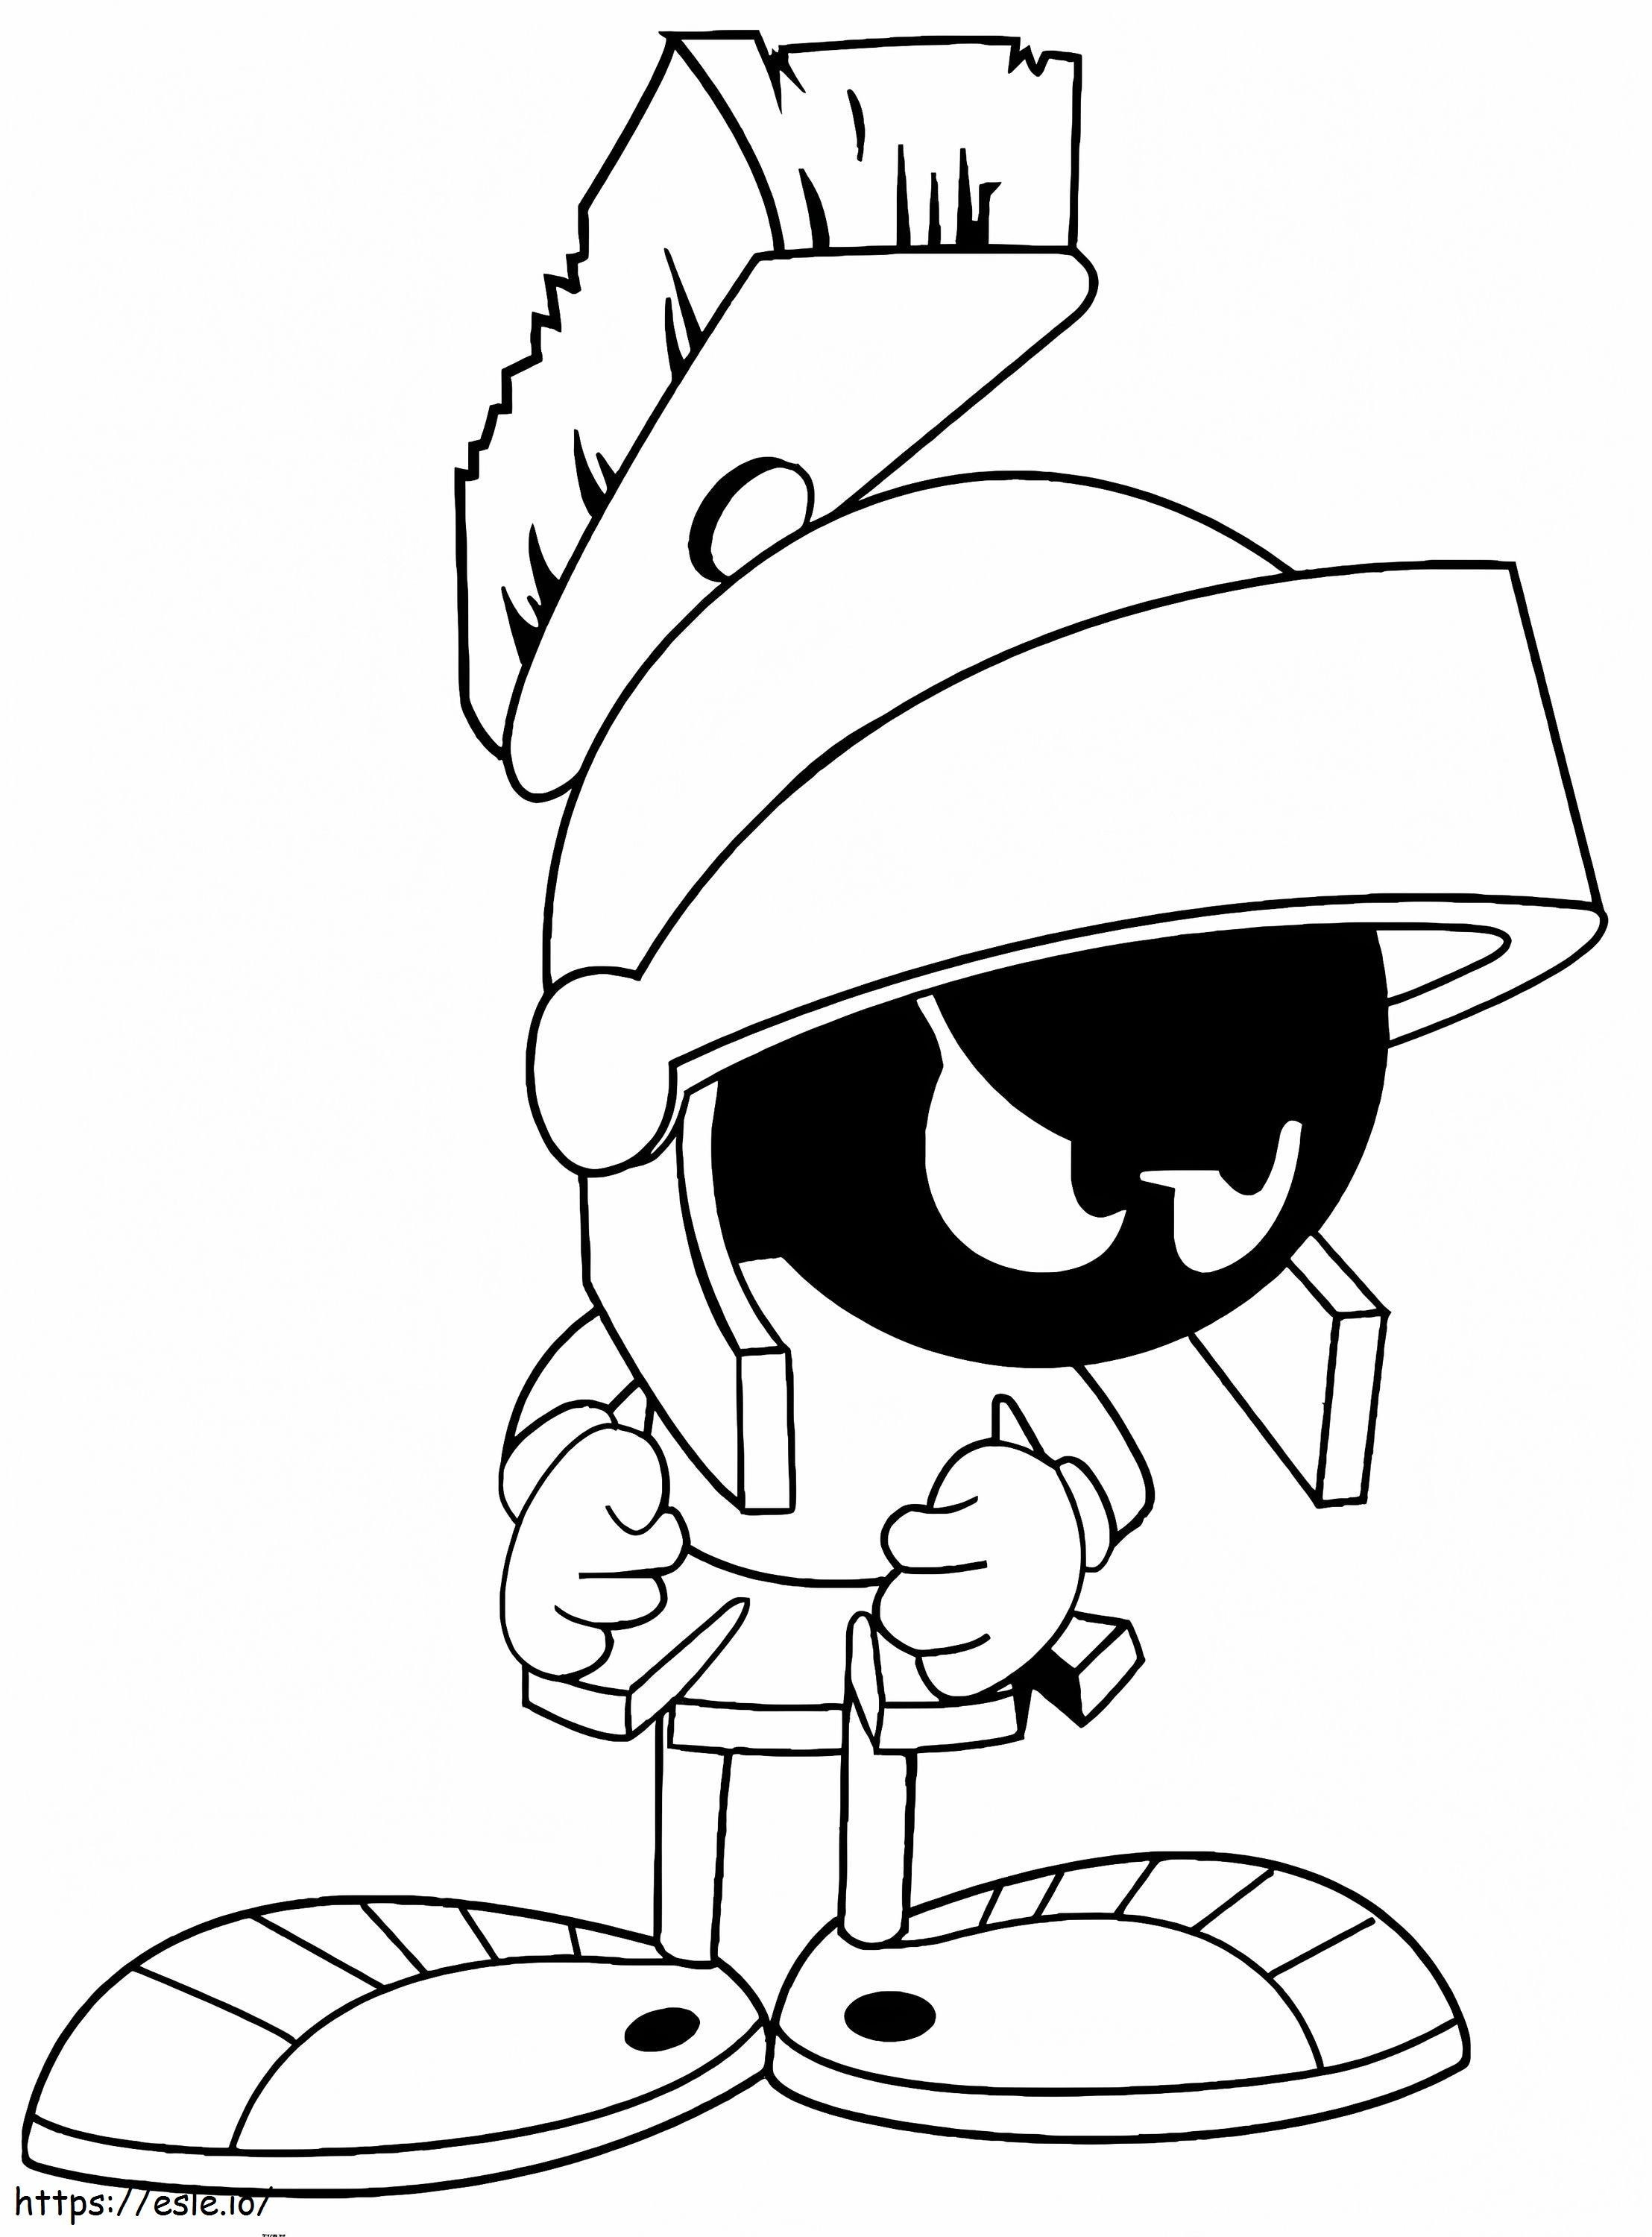 Angry Marvin The Martian coloring page